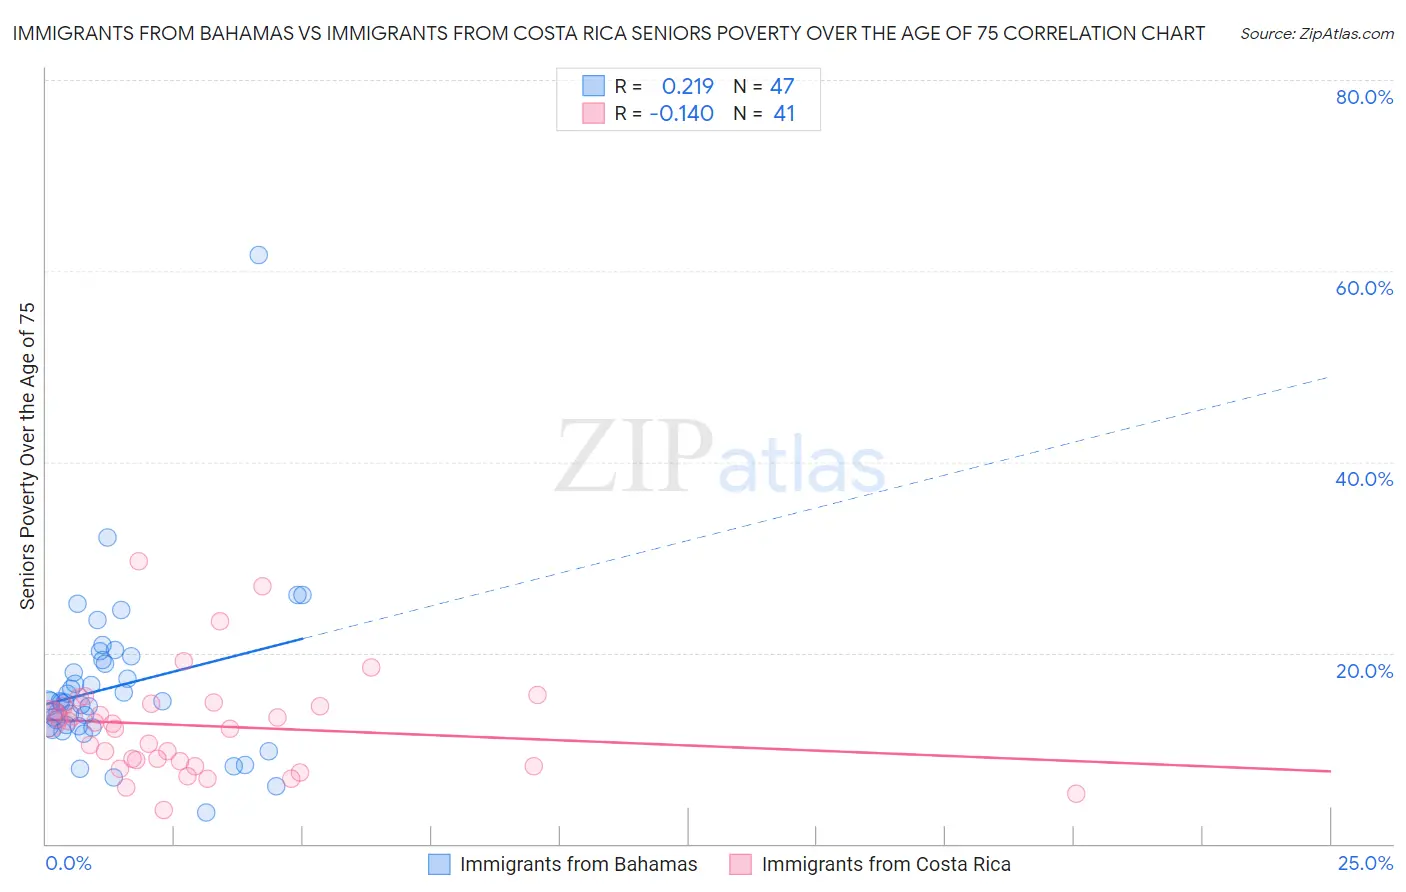 Immigrants from Bahamas vs Immigrants from Costa Rica Seniors Poverty Over the Age of 75